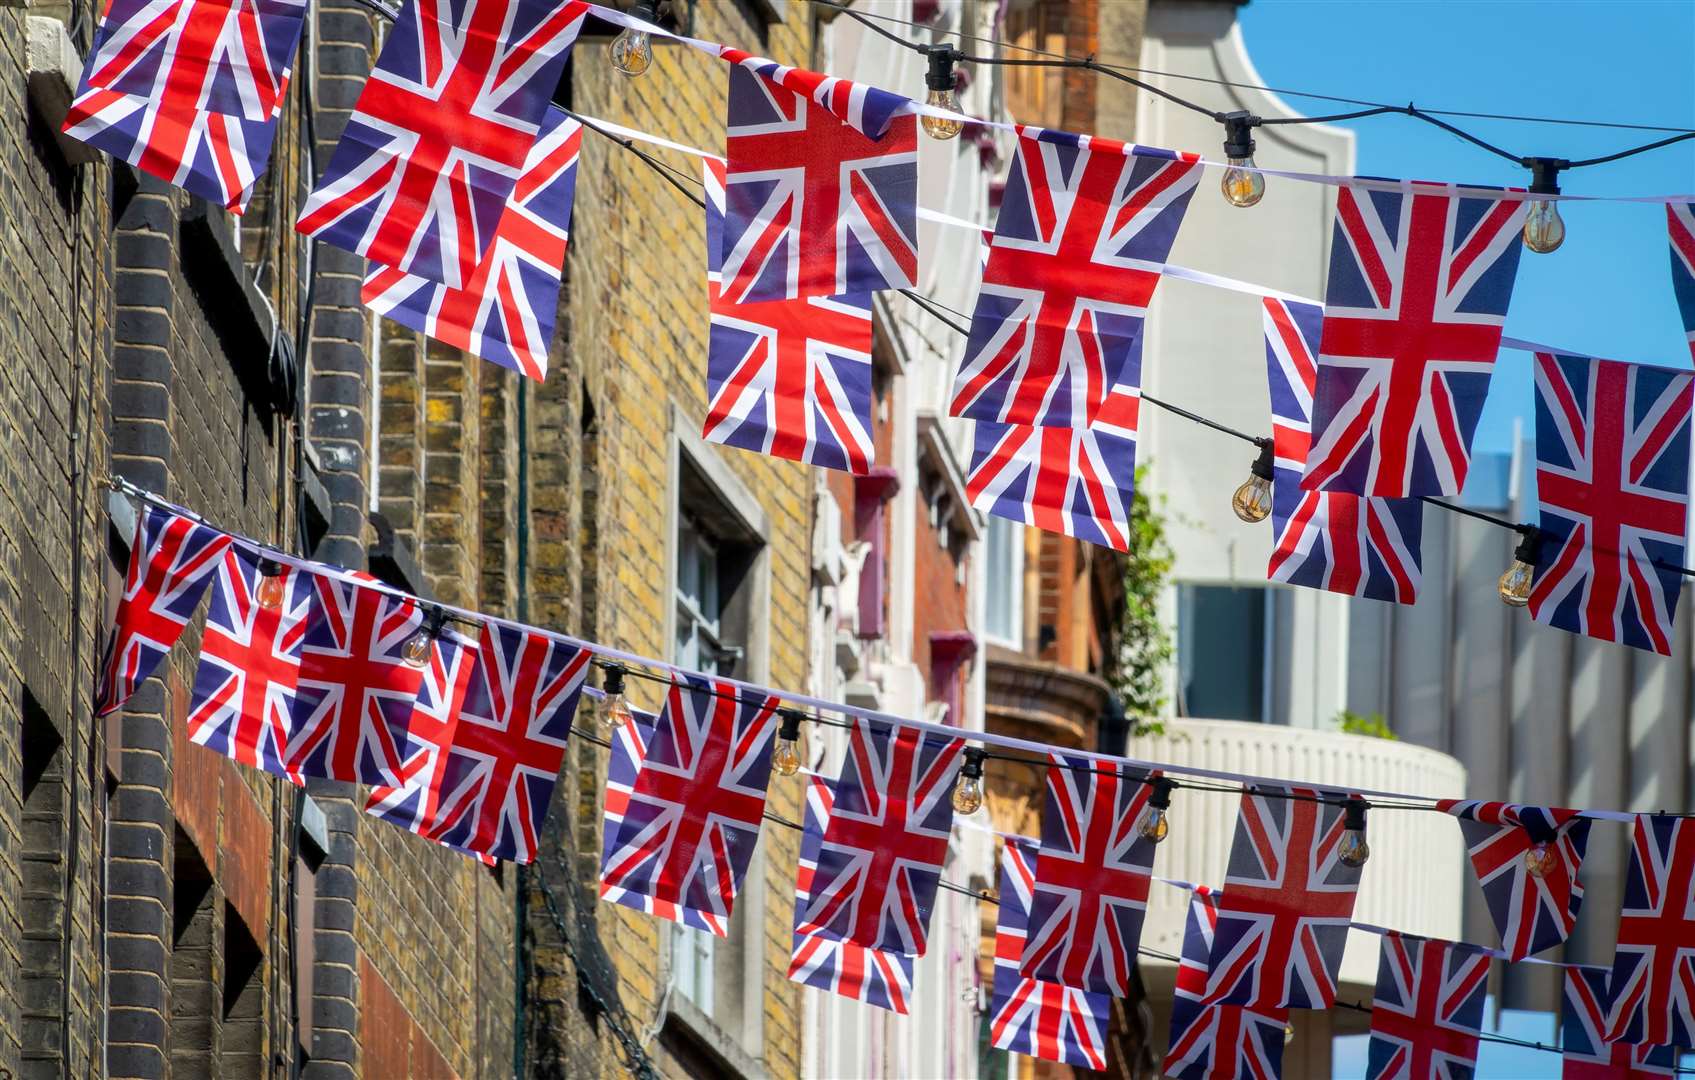 Streets are hanging out the bunting this weekend. Image: iStock.